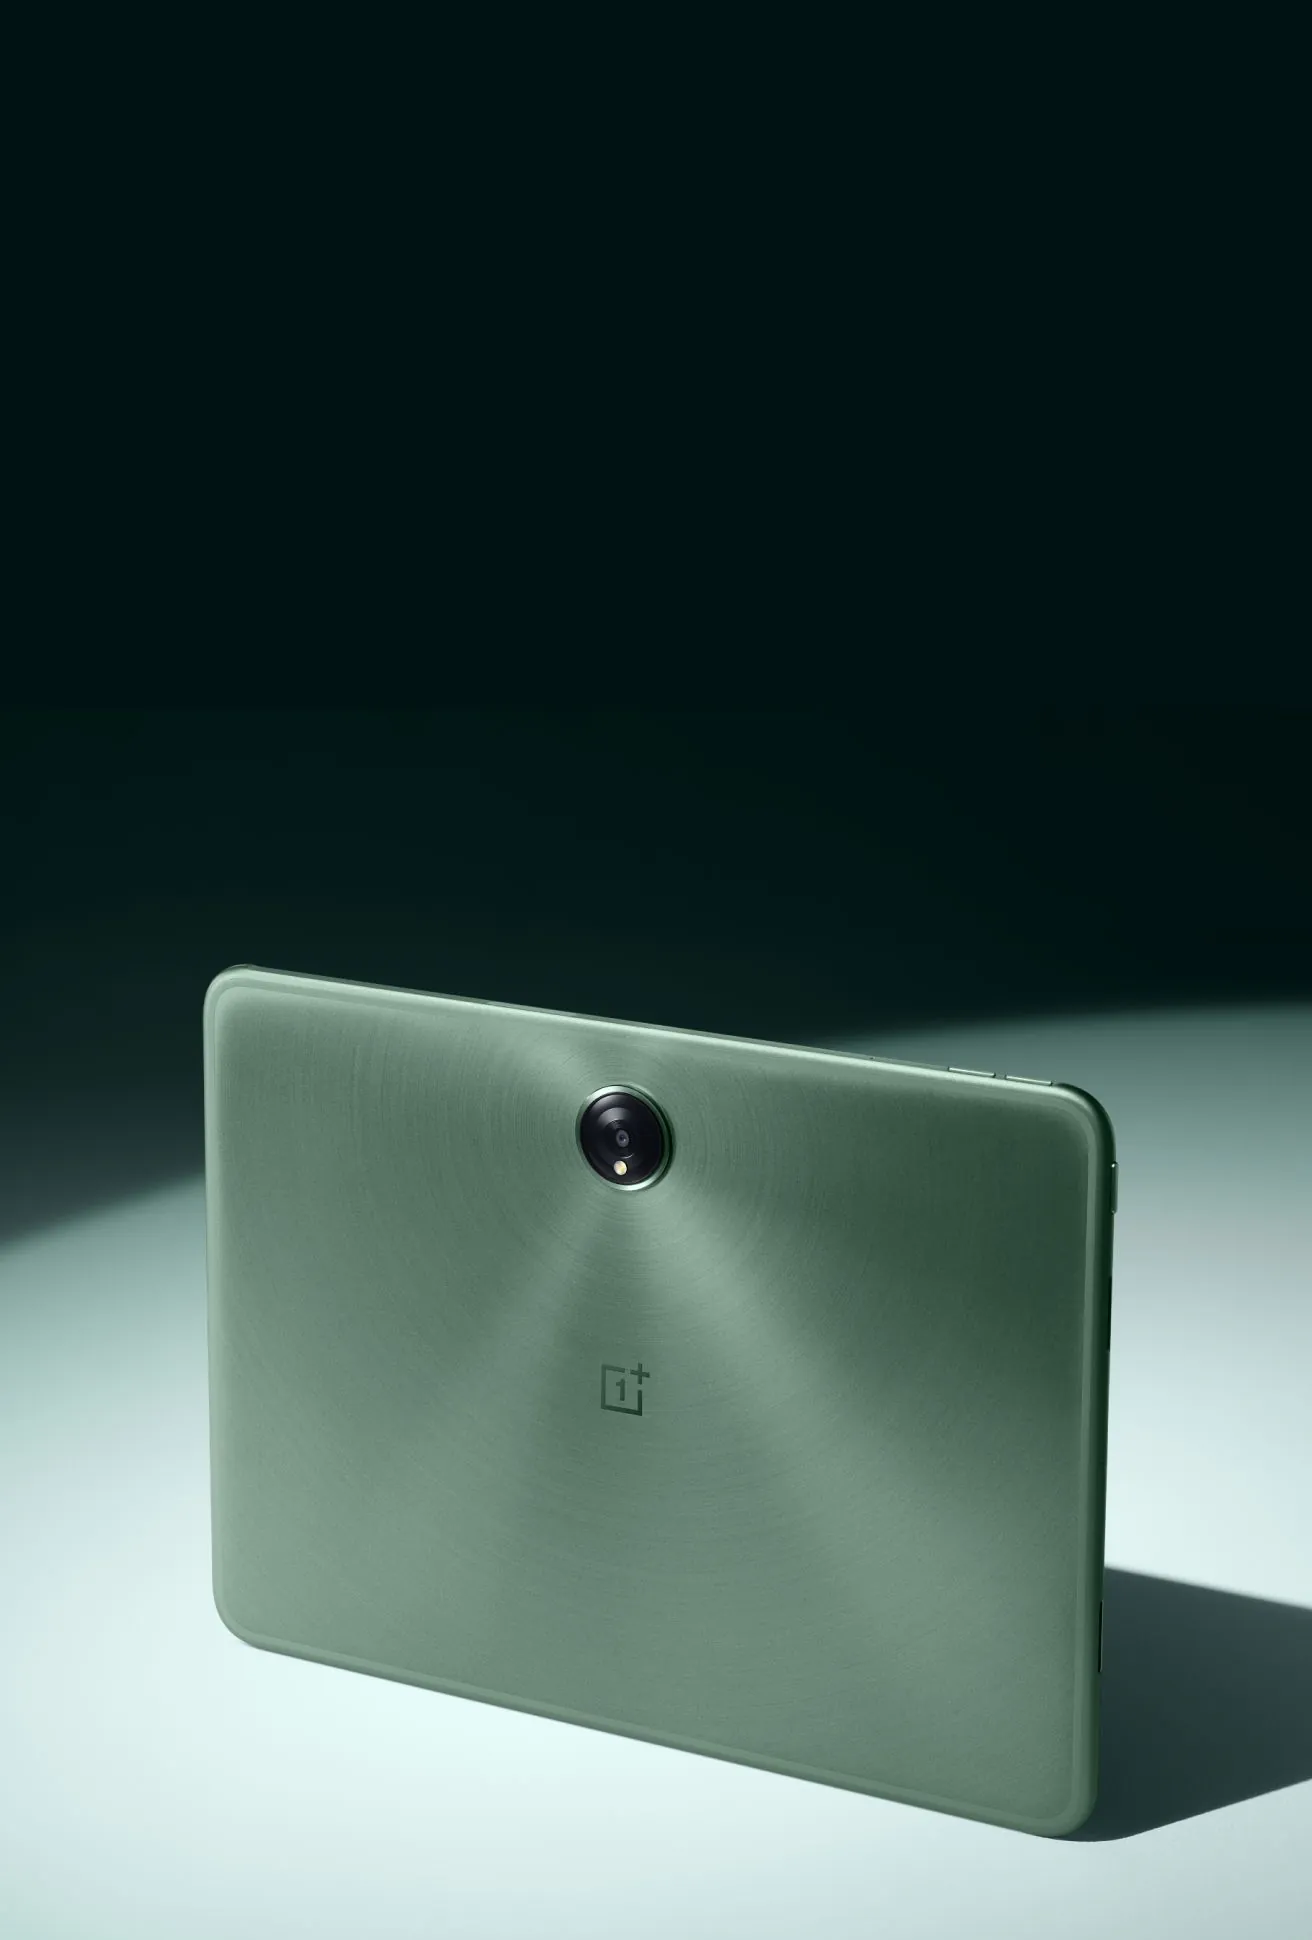 OnePlus Pad 11.6 inches 128GB WiFi Green - Tablets - Coolblue